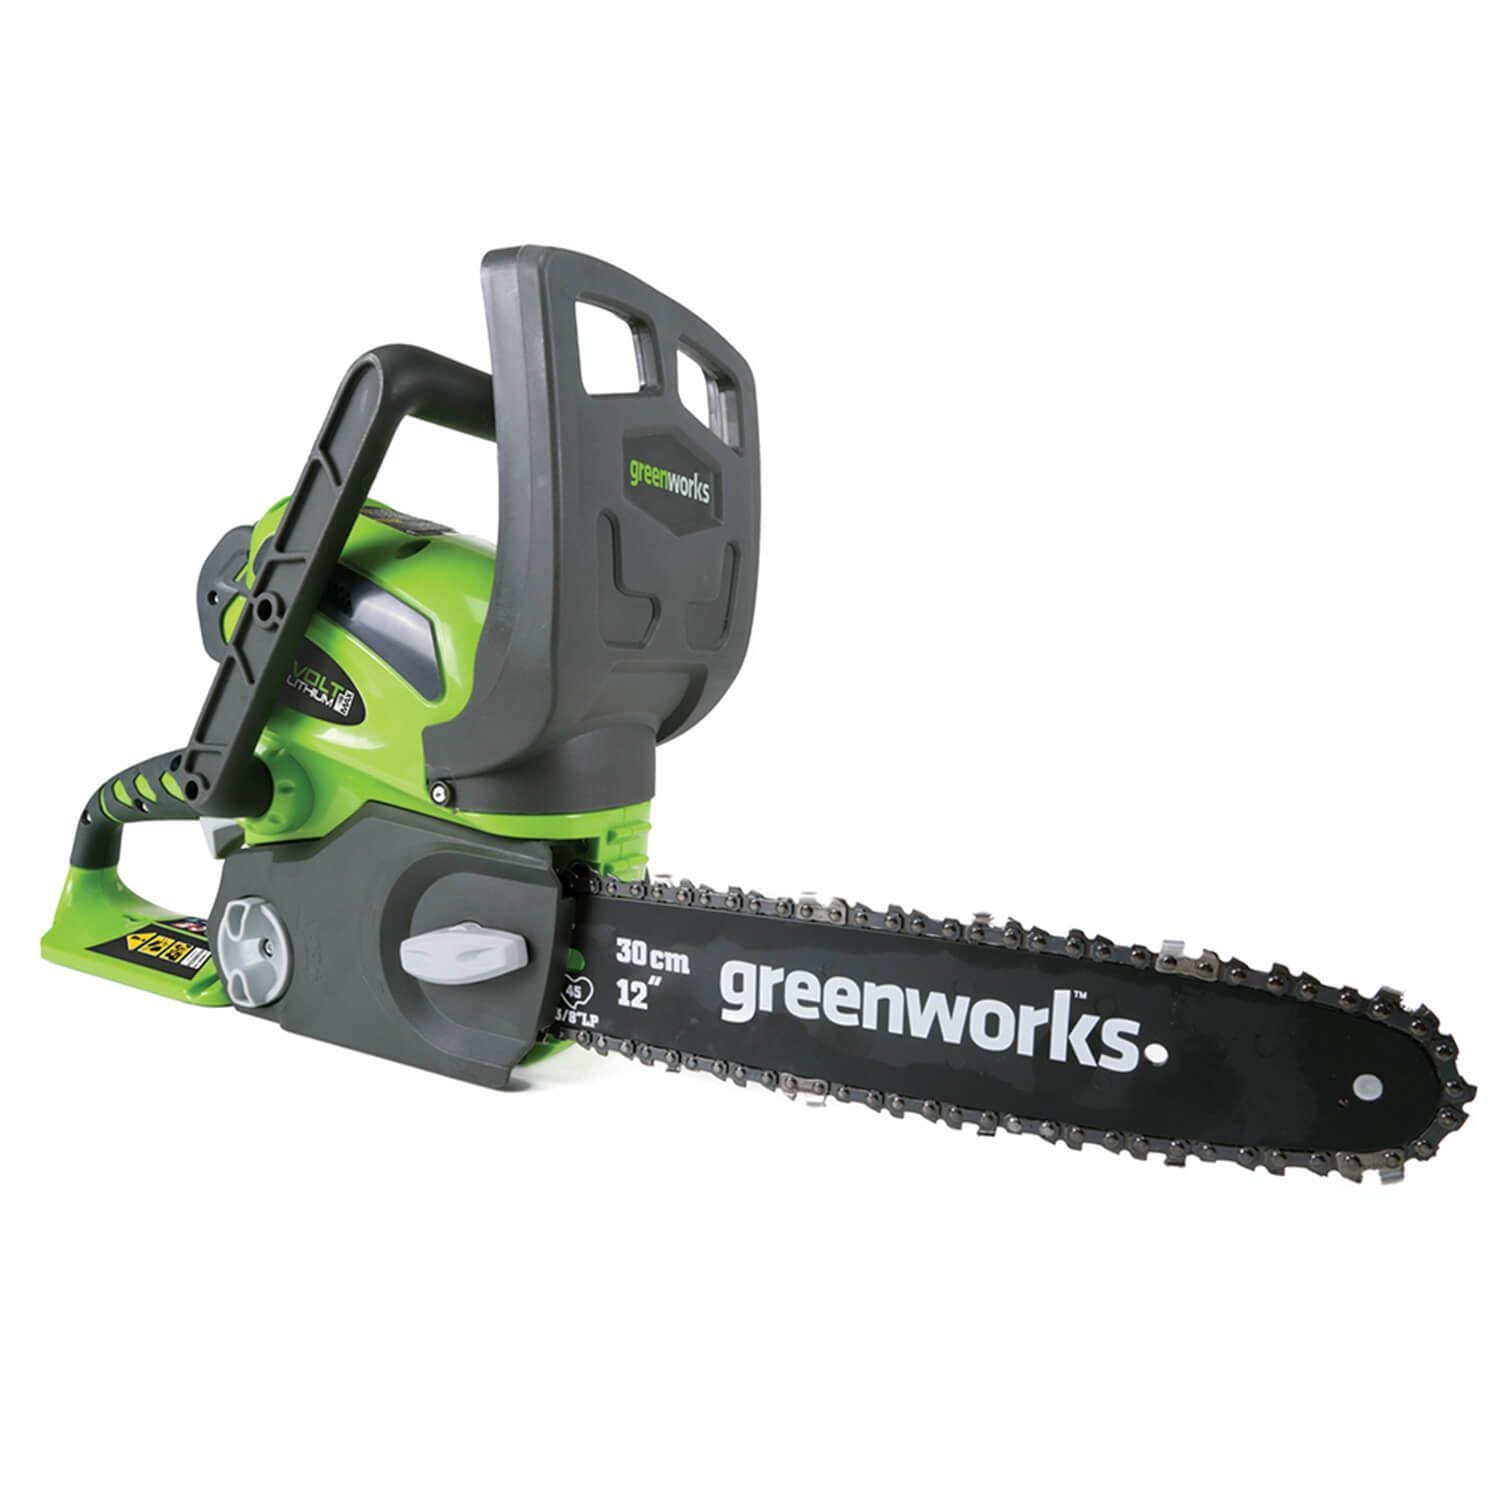 GreenWorks 20292 40V 12" Cordless Chainsaw, Battery and Charger Sold Separately - image 1 of 14